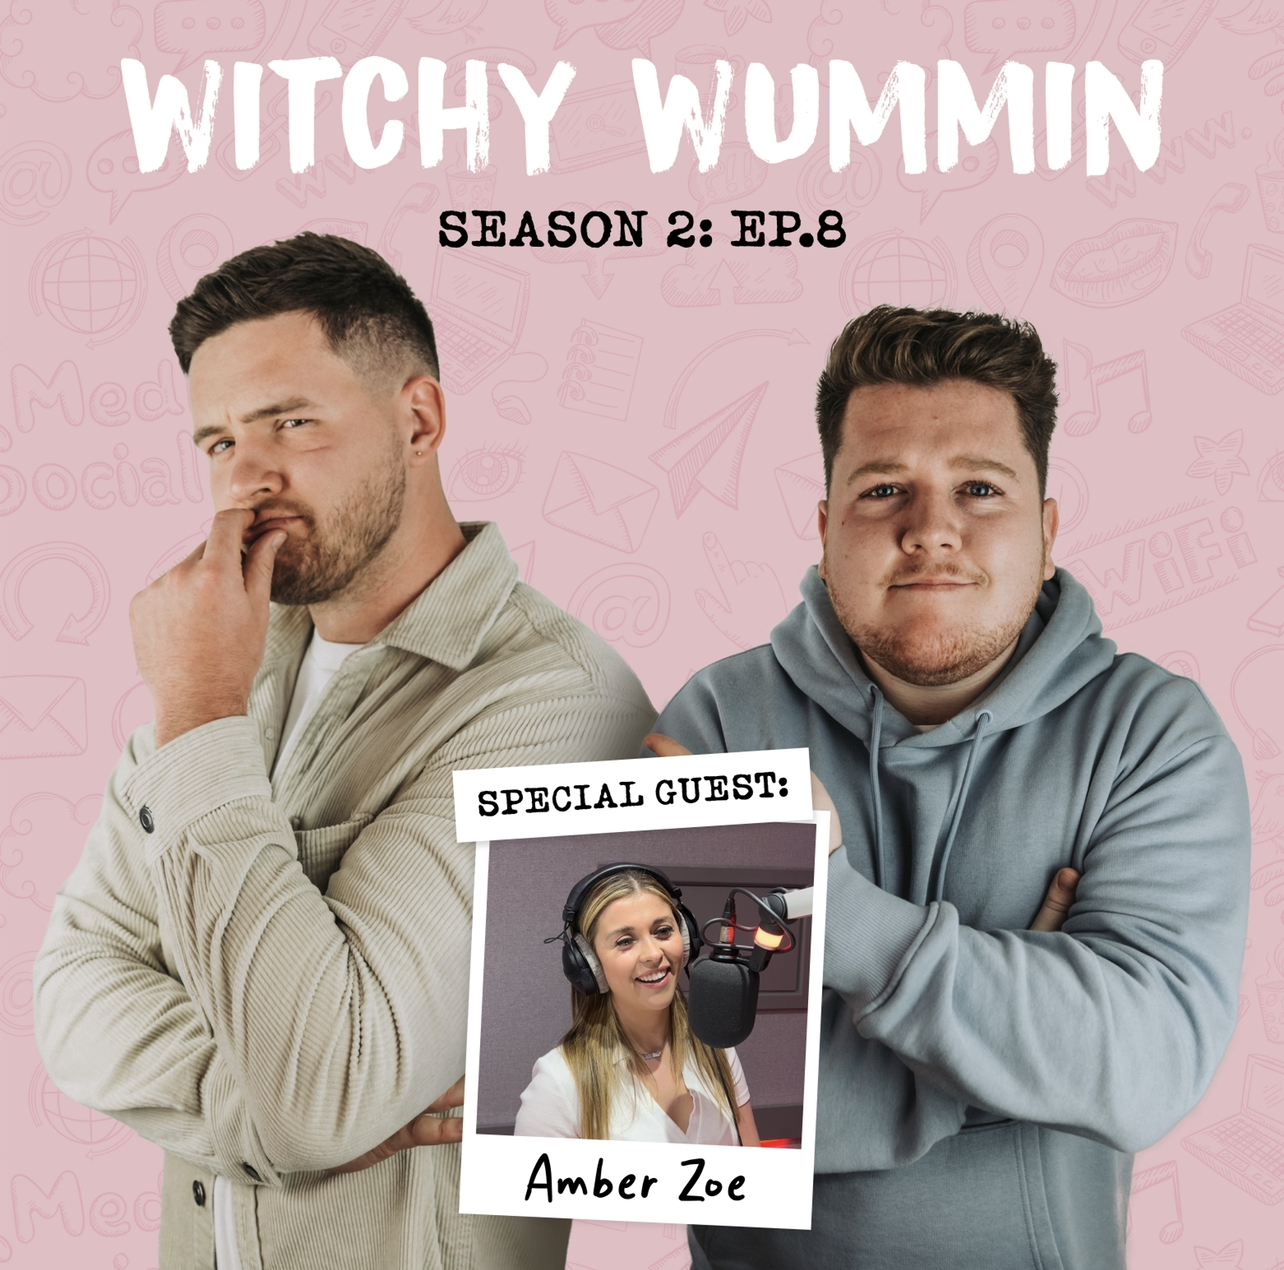 The latest episode - Witchy Wummin